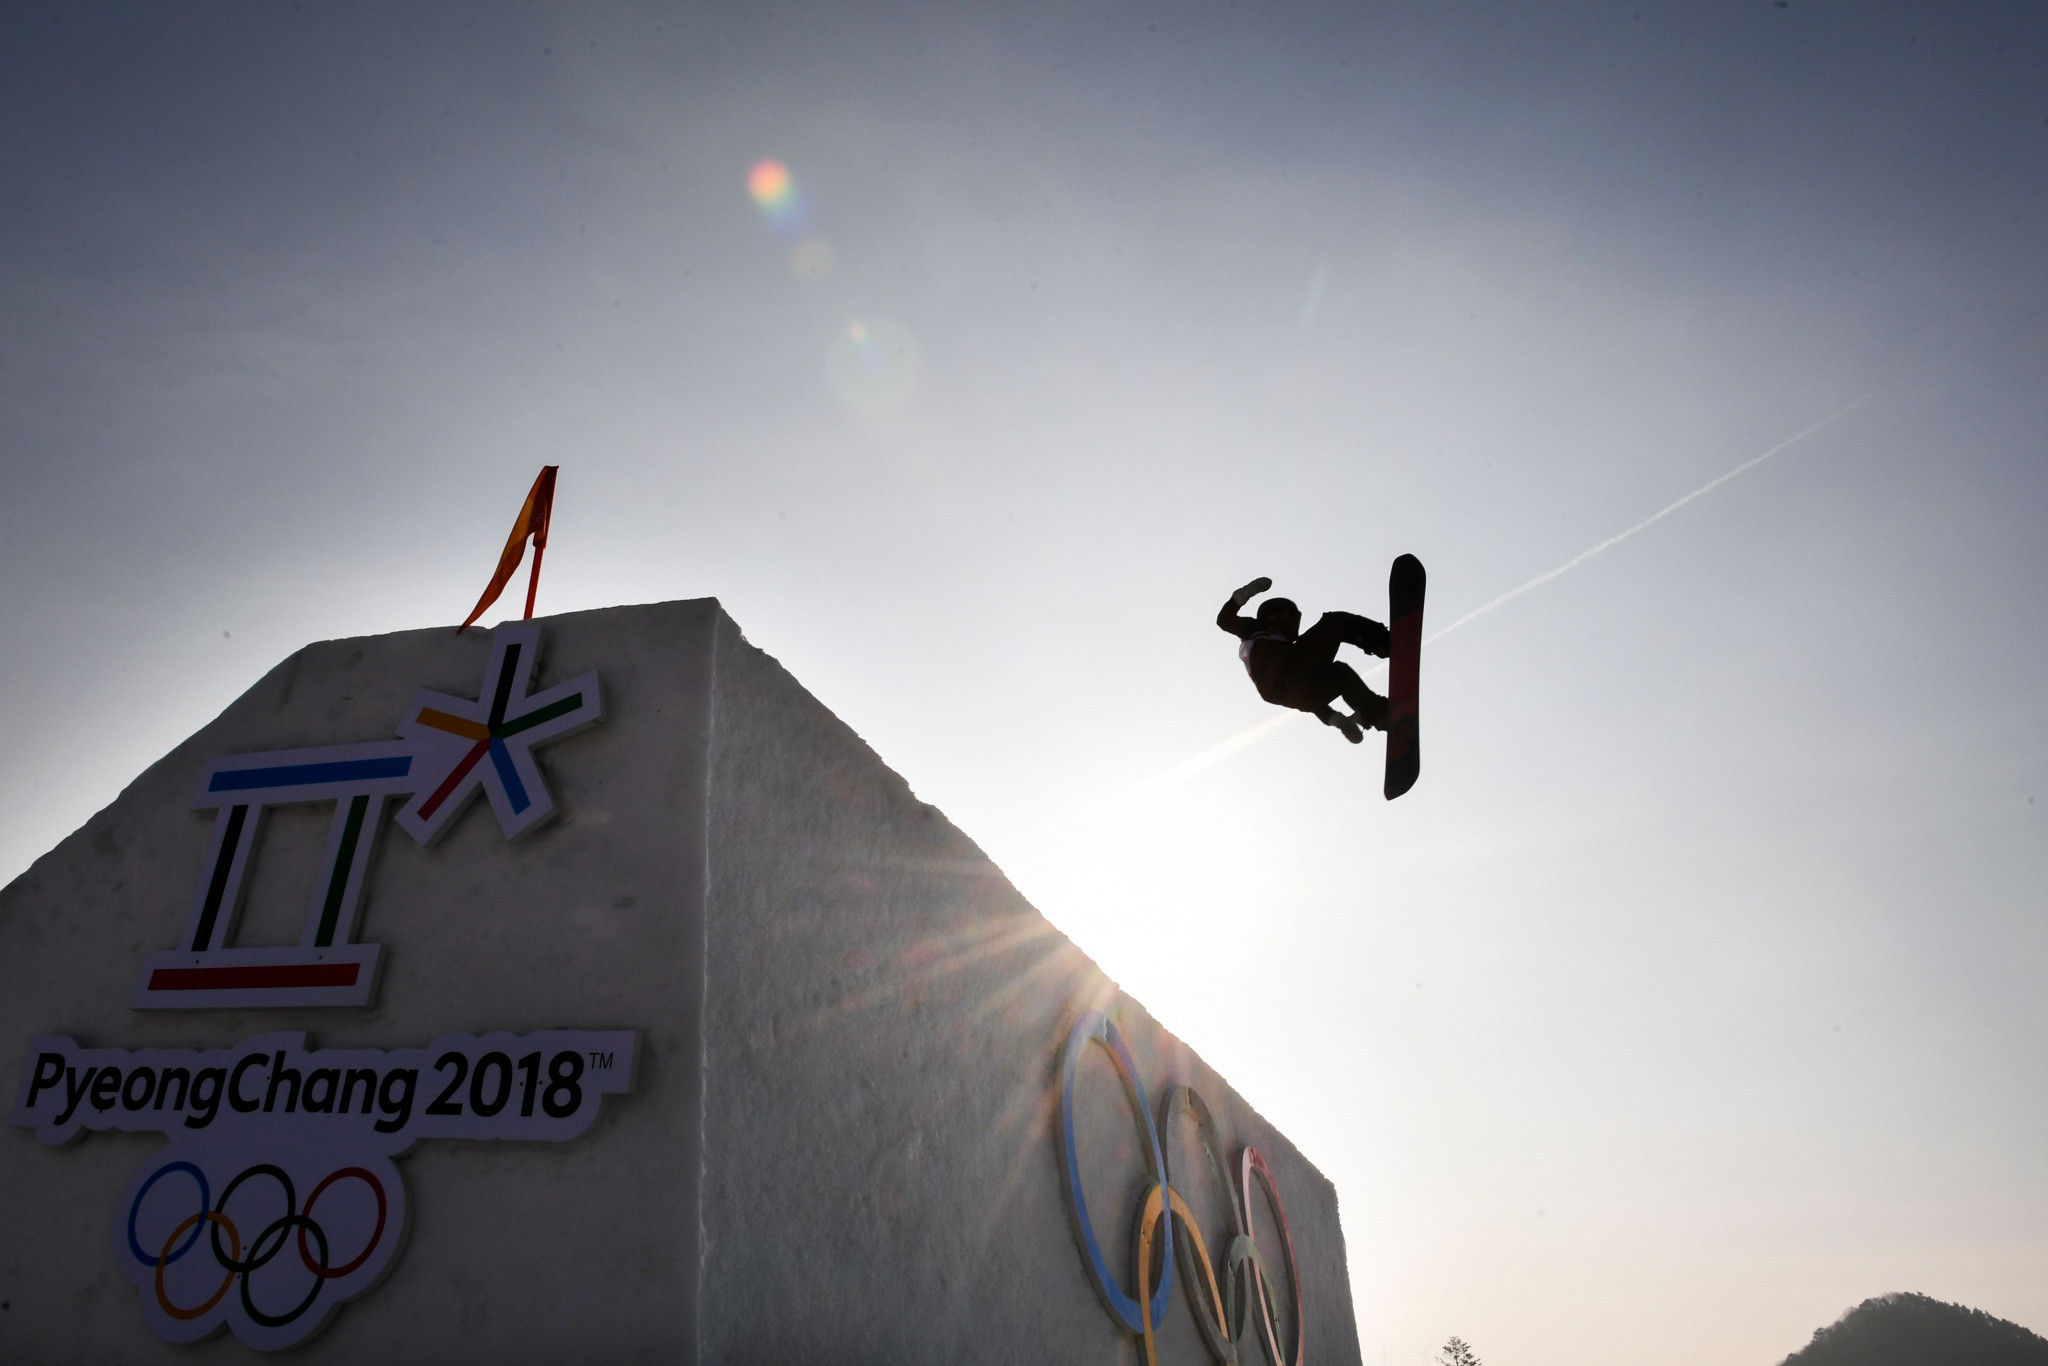 Modena to take over FIS World Cup big air event from Milan